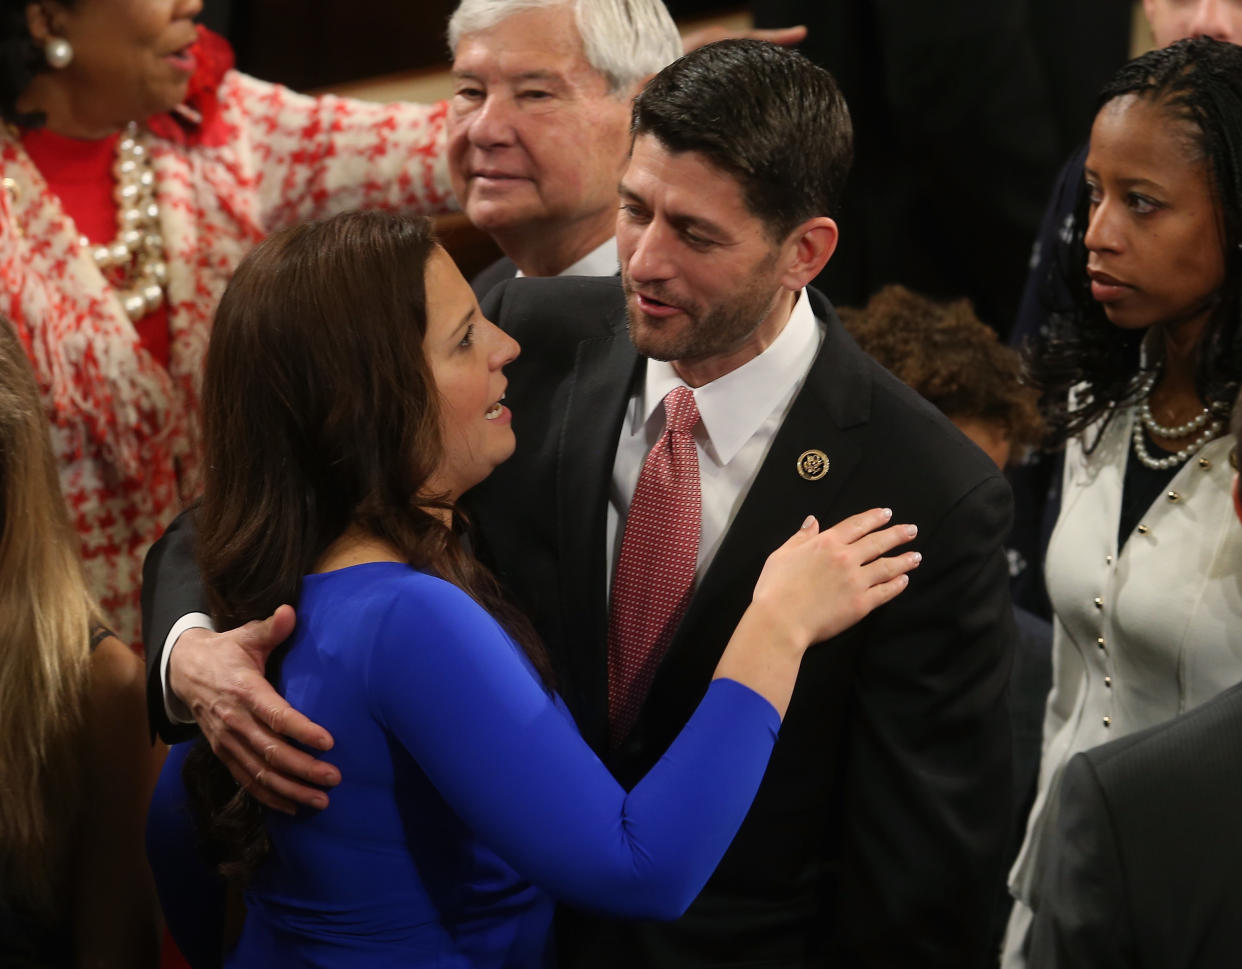 U.S. Rep. Elise Stefanik (R-NY)(L) gets a hug from U.S. Rep. Paul Ryan (R-WI) before the start of the first session of the 114th Congress in the House Chambers January 6, 2015 in Washington, DC. (Mark Wilson/Getty Images)